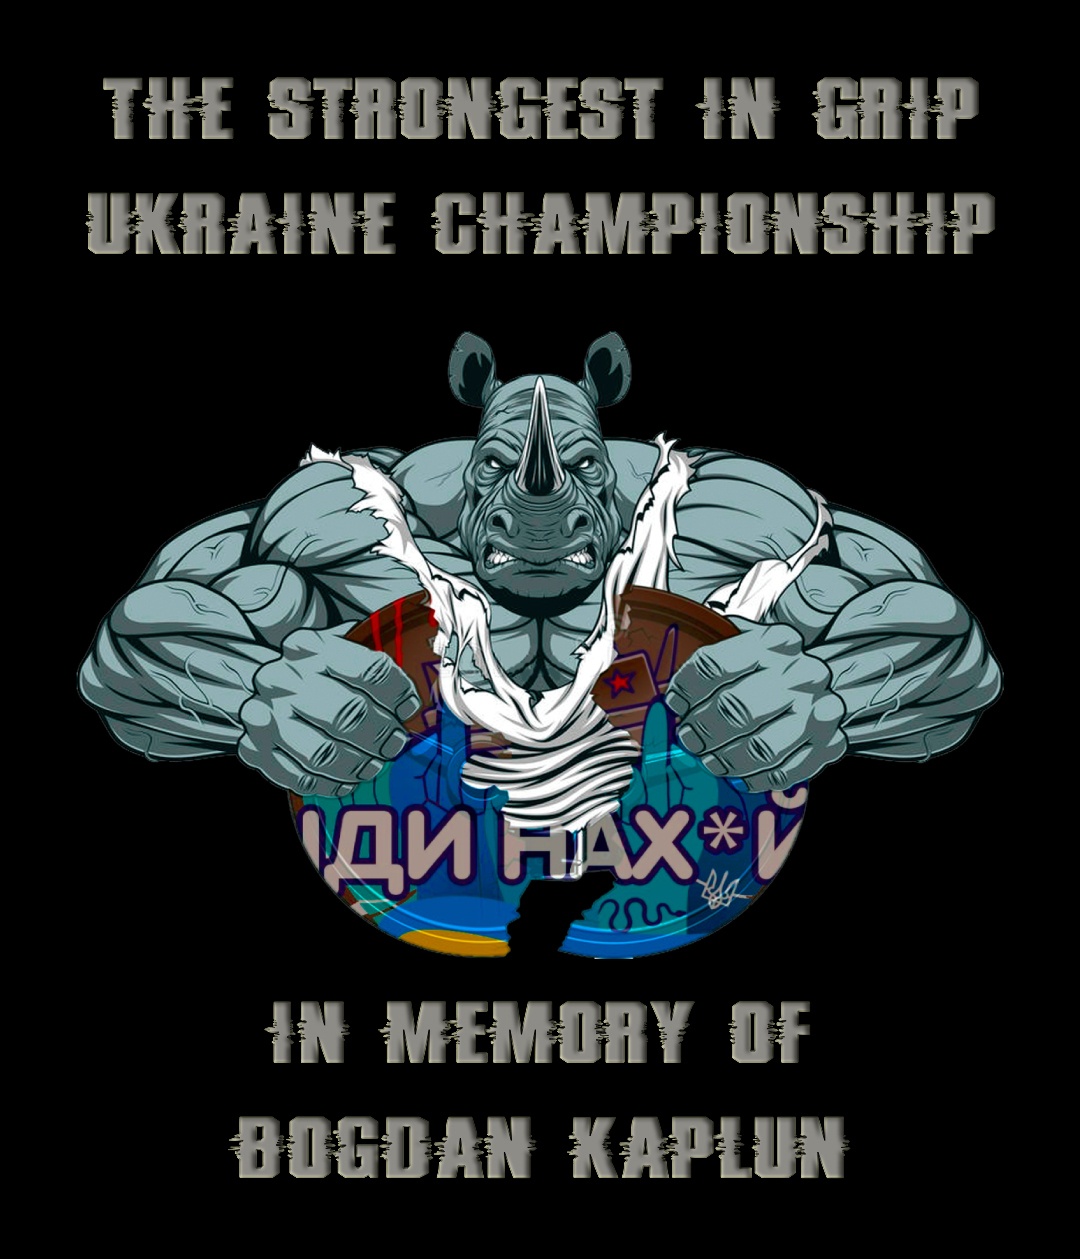 The Ukrainian Armlifting Federation honored fallen friend and fellow grip strength competitor Kaplun Bogdan with a competition, as Ukraine continues to oust the Russian invaders as soon as possible. IronMind® | Courtesy of Dmytro Grunsky